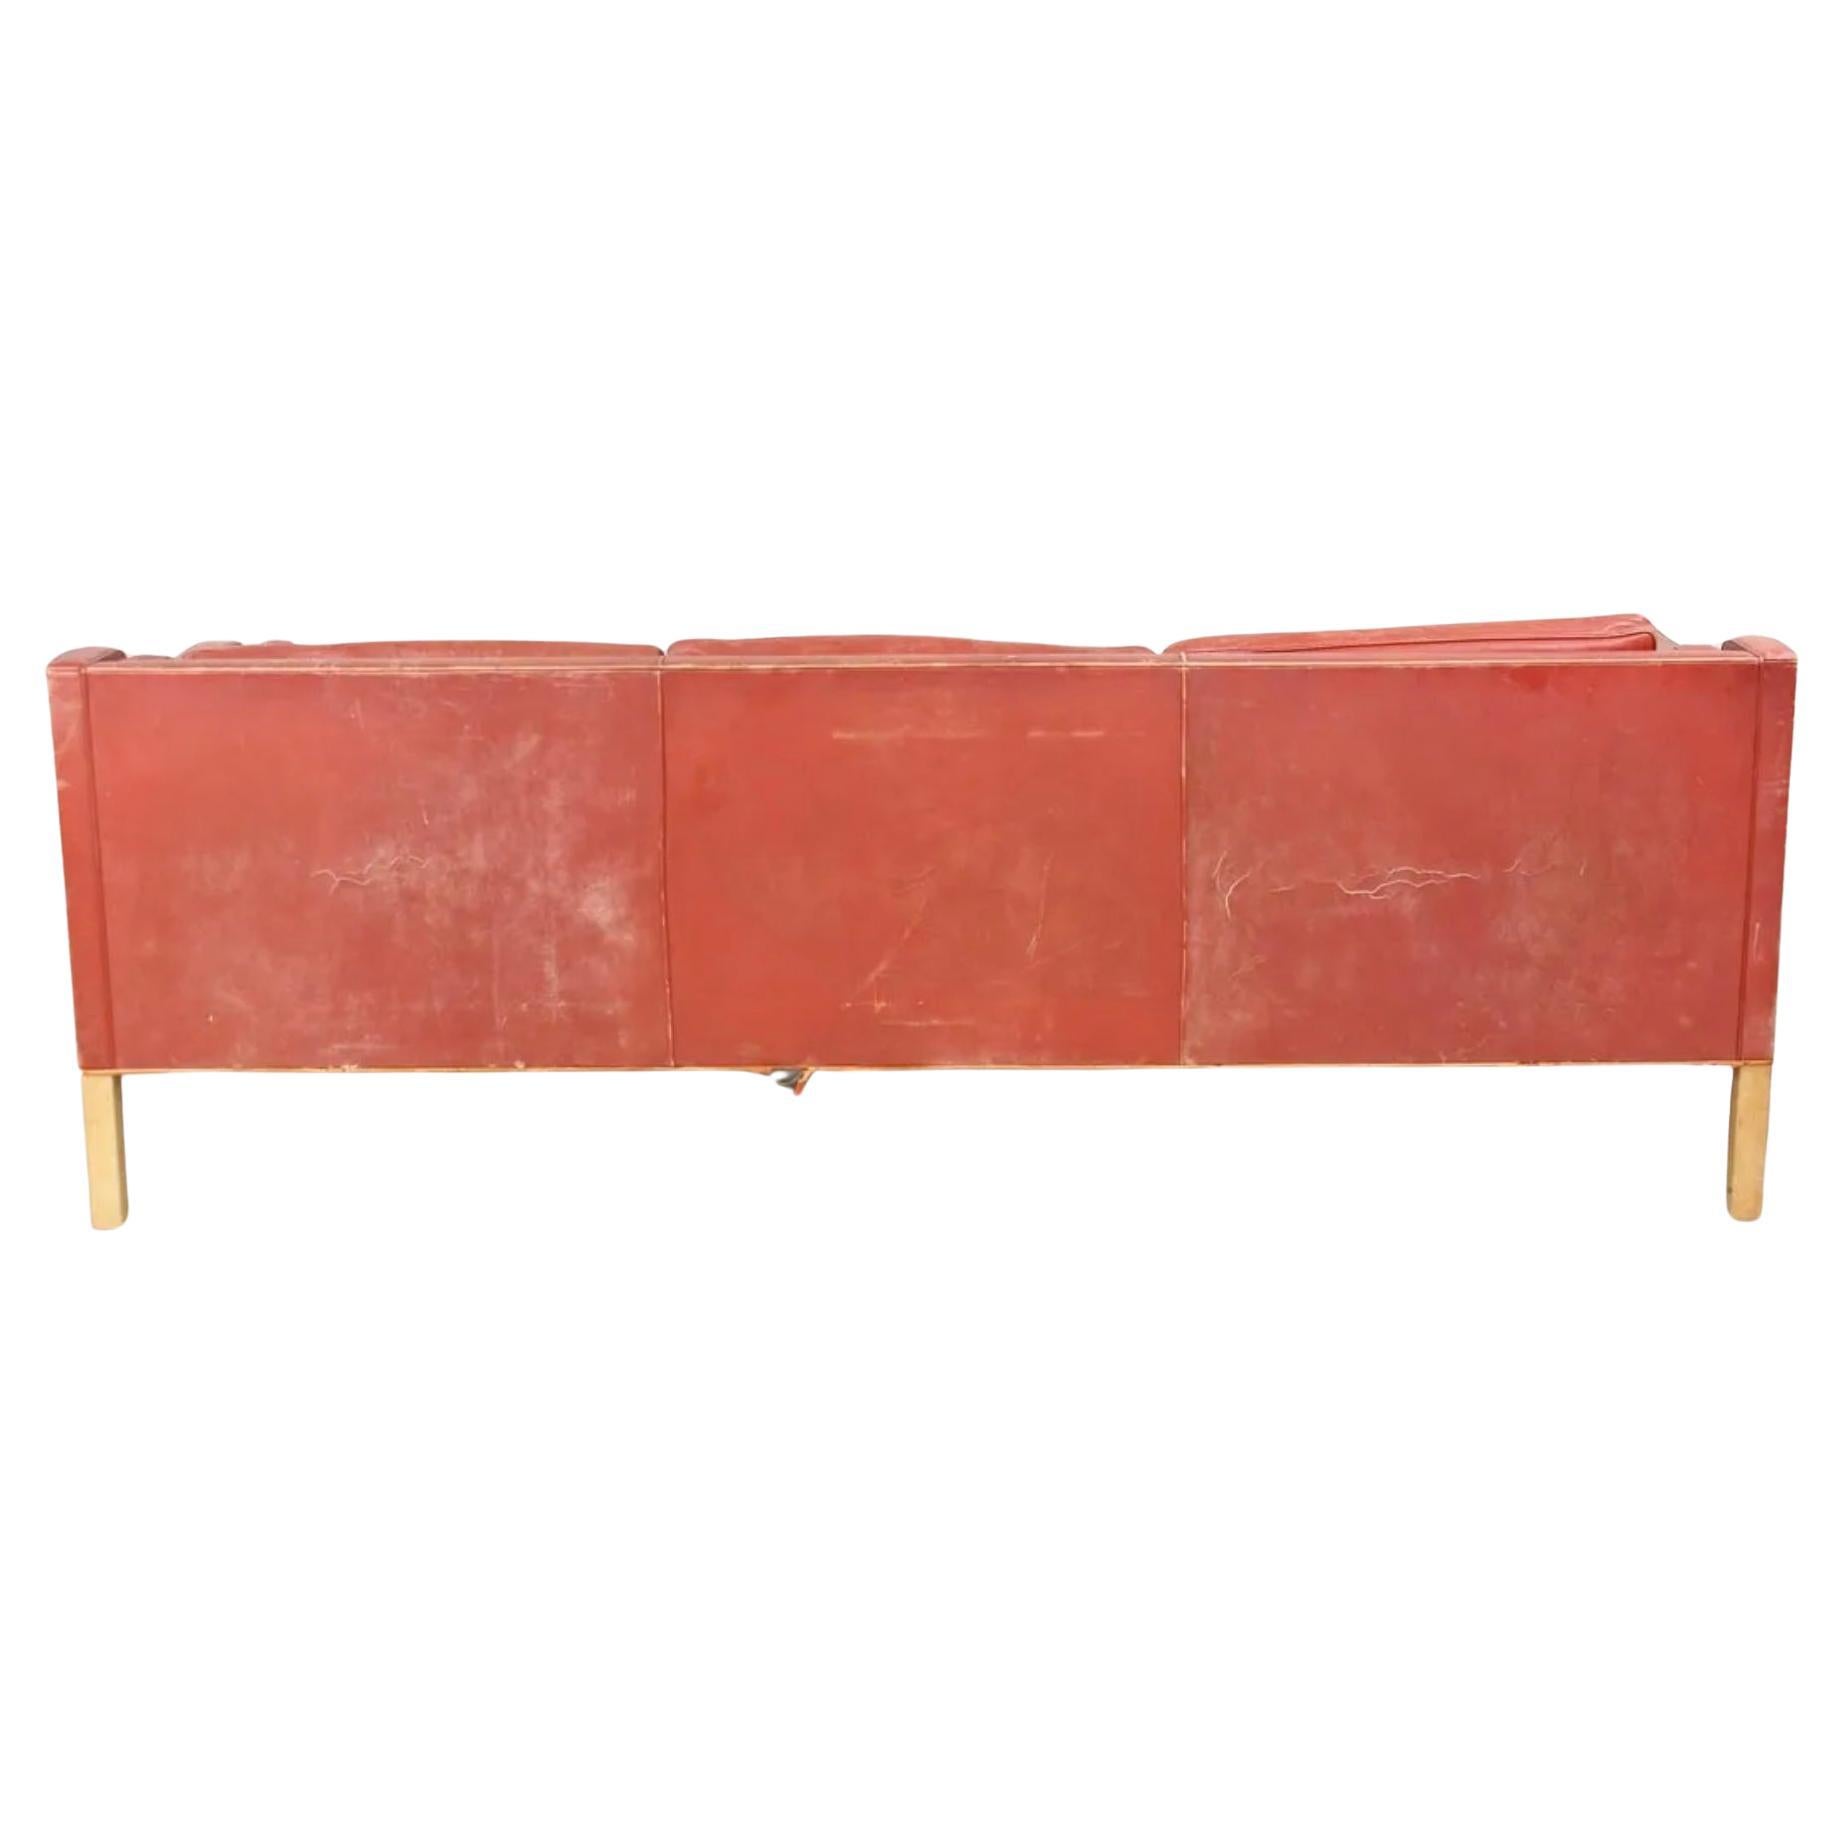 Mid-20th Century Mid century Danish Modern Beautiful Red Leather 3 Seat Sofa by Børge Mogensen For Sale